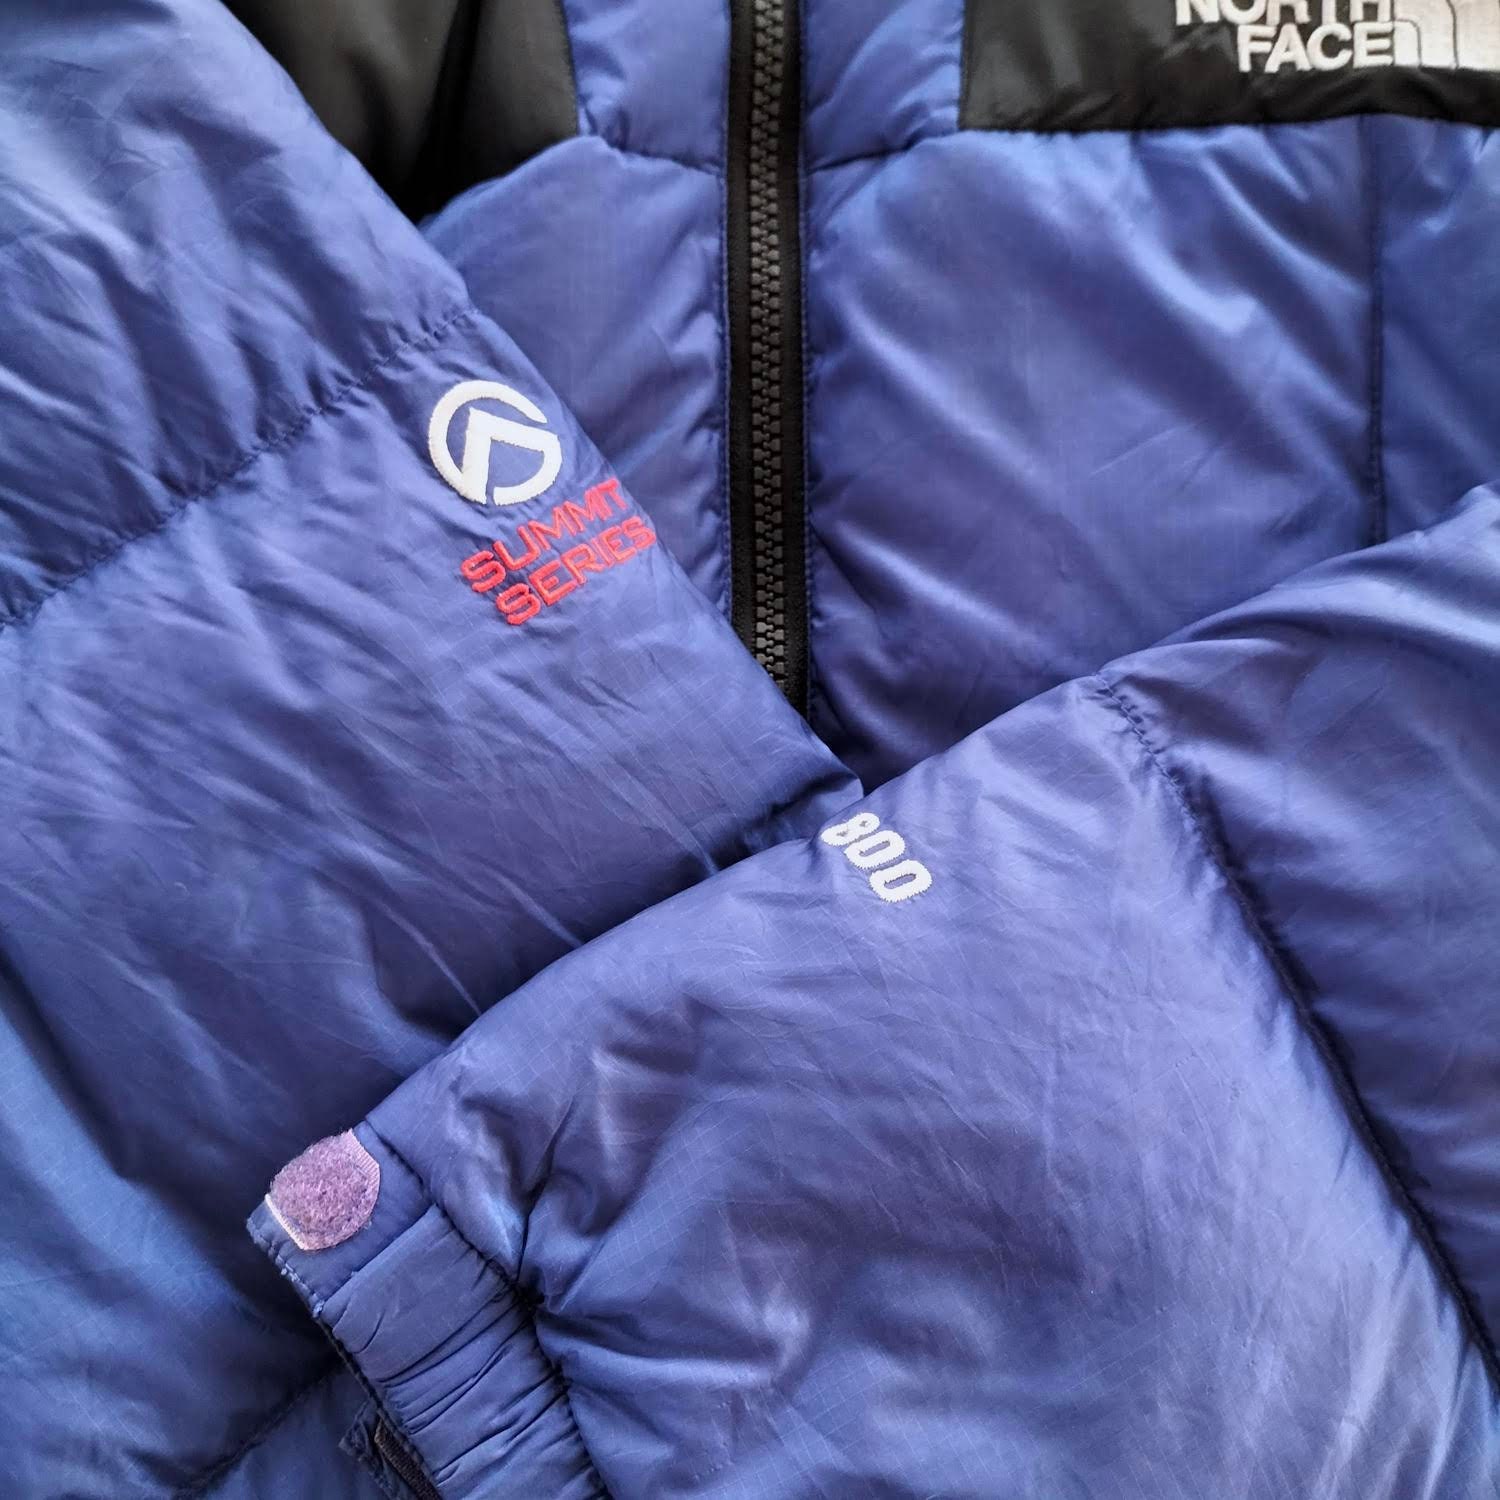 The North Face 800 Summit Series Mens Blue and Black Puffer | Etsy